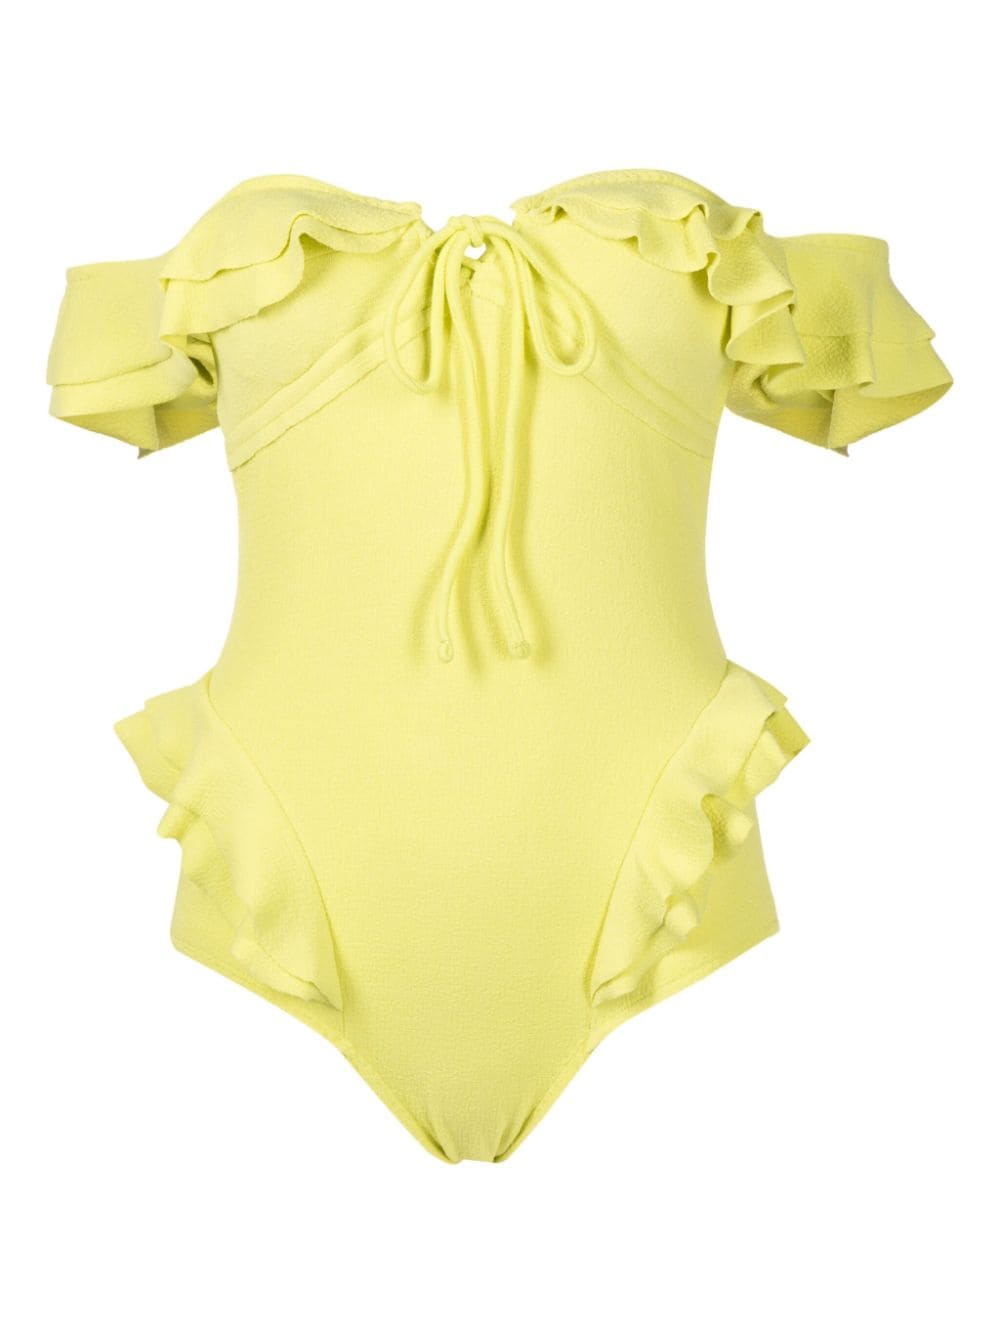 Lanzo ruffled off-shoulder swimsuit